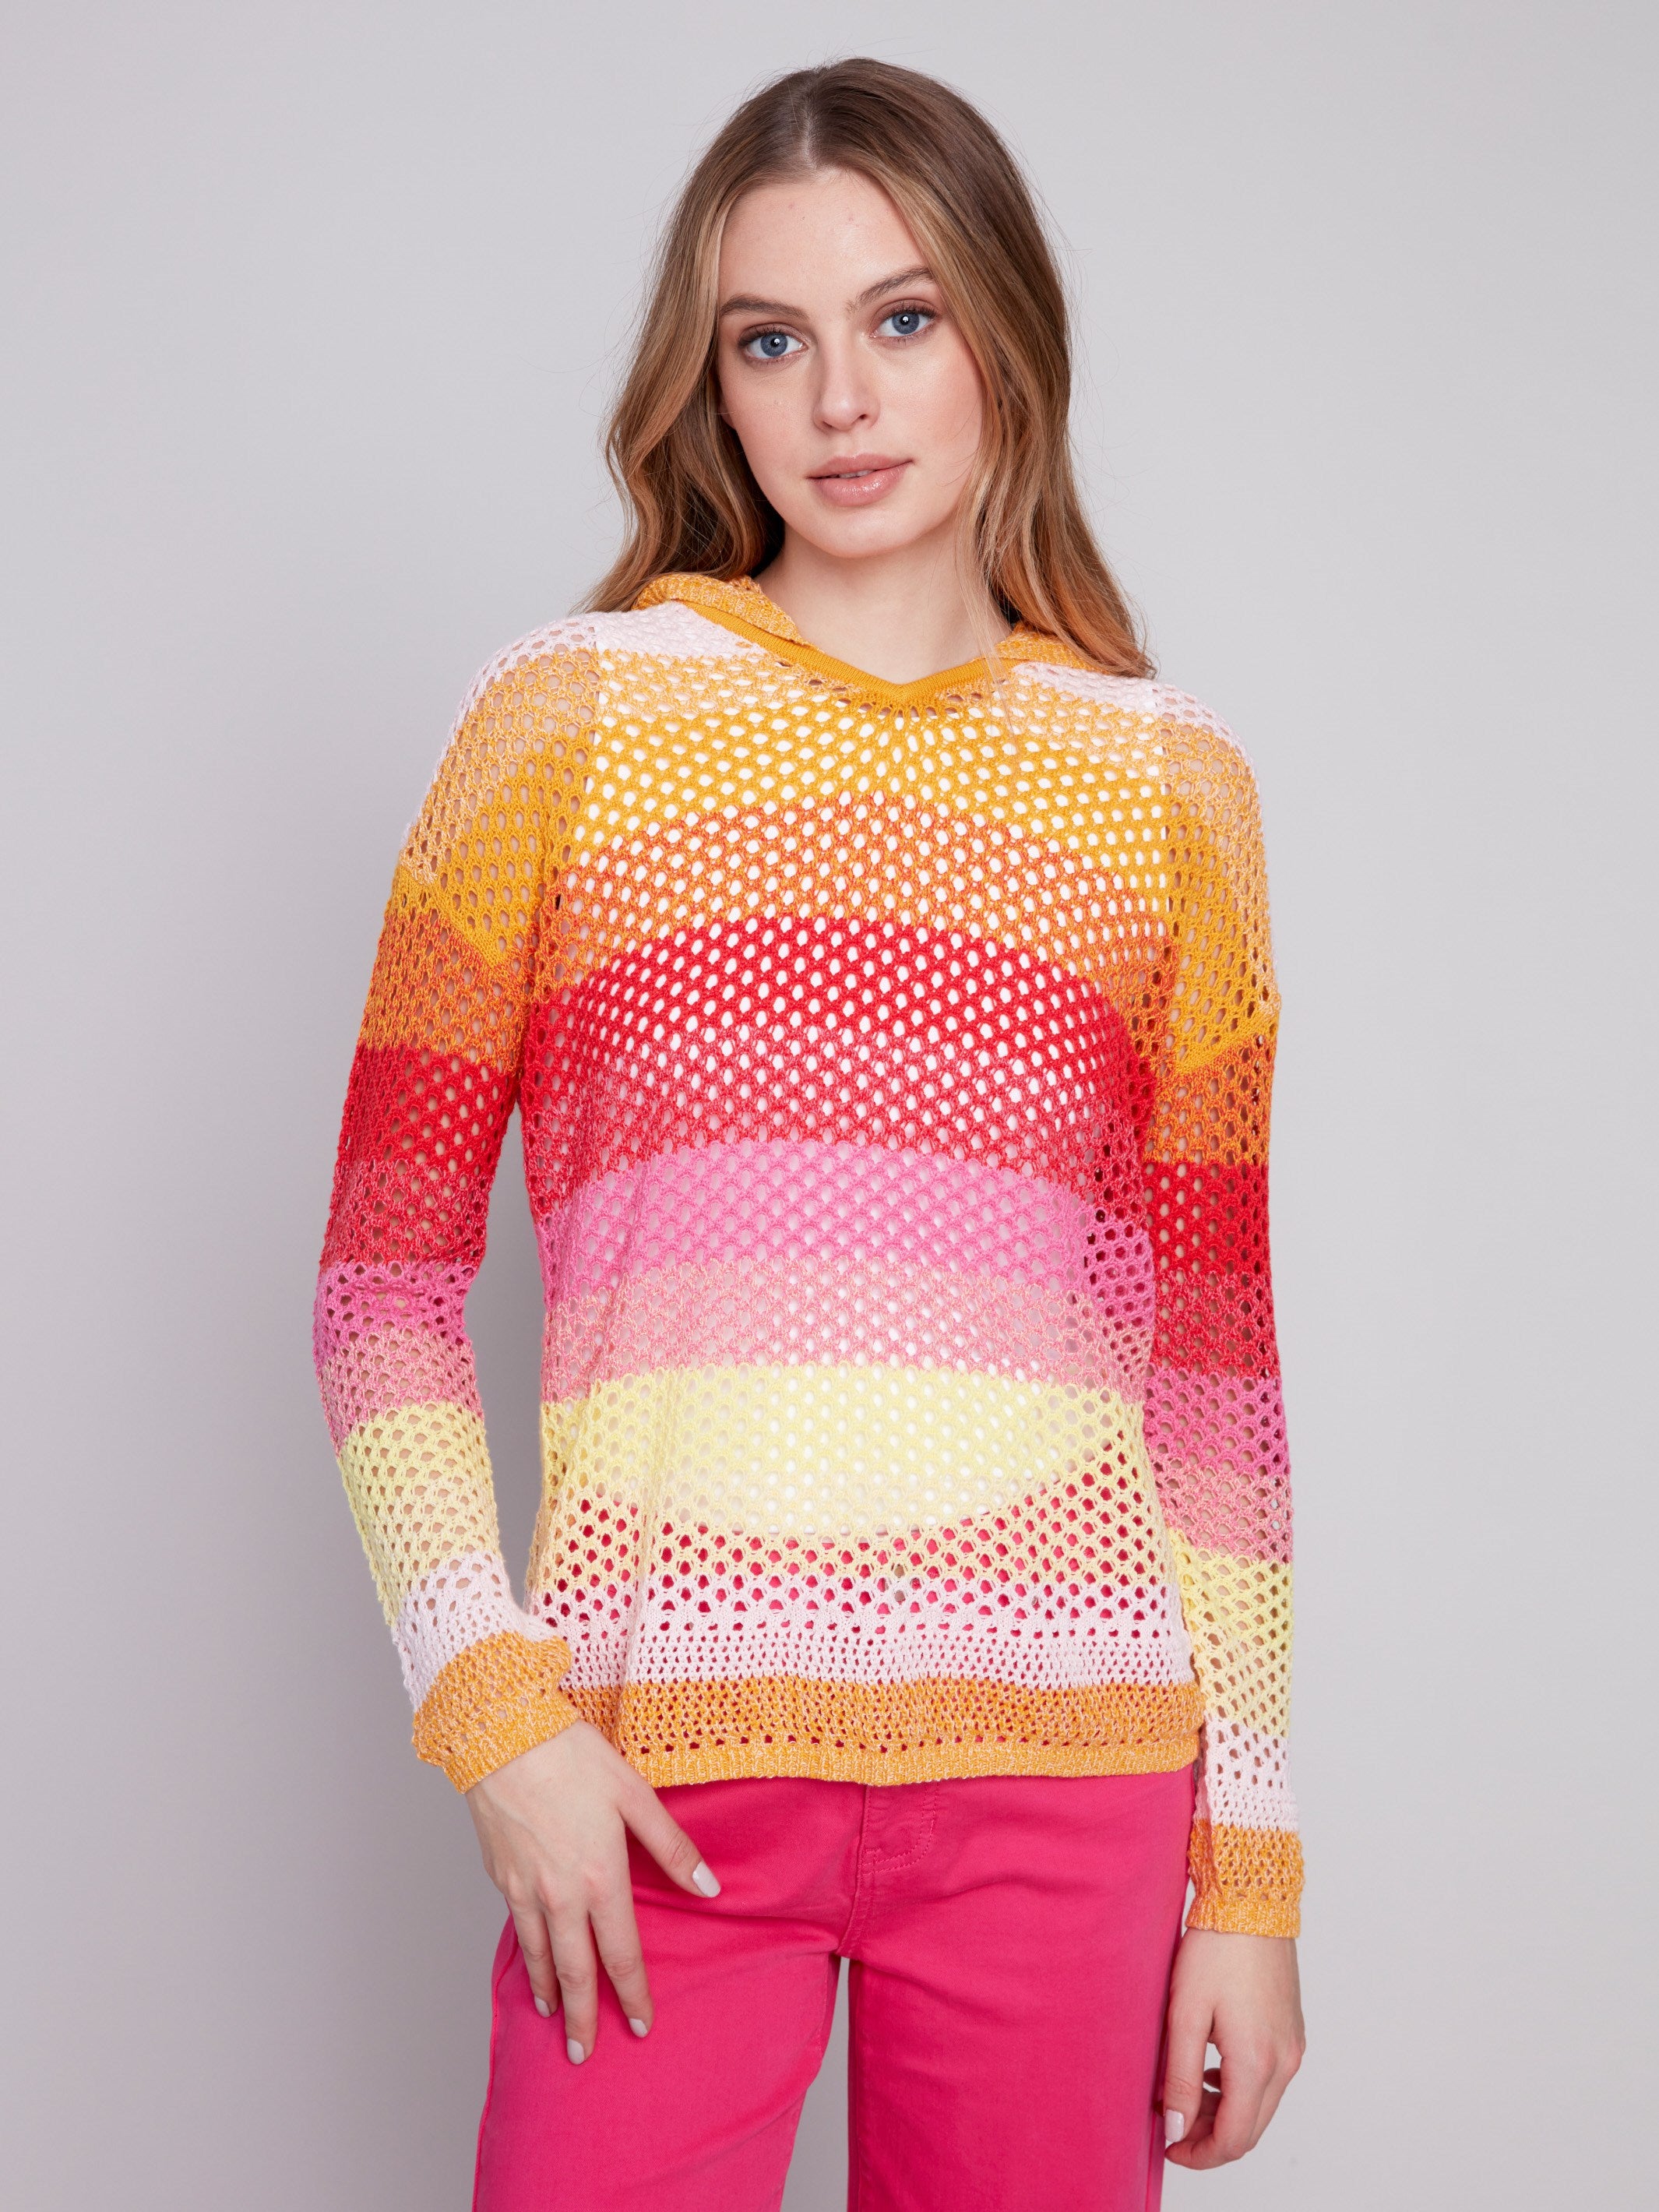 Striped Fishnet Crochet Hoodie Sweater - Punch - Charlie B Collection Canada - Image 1